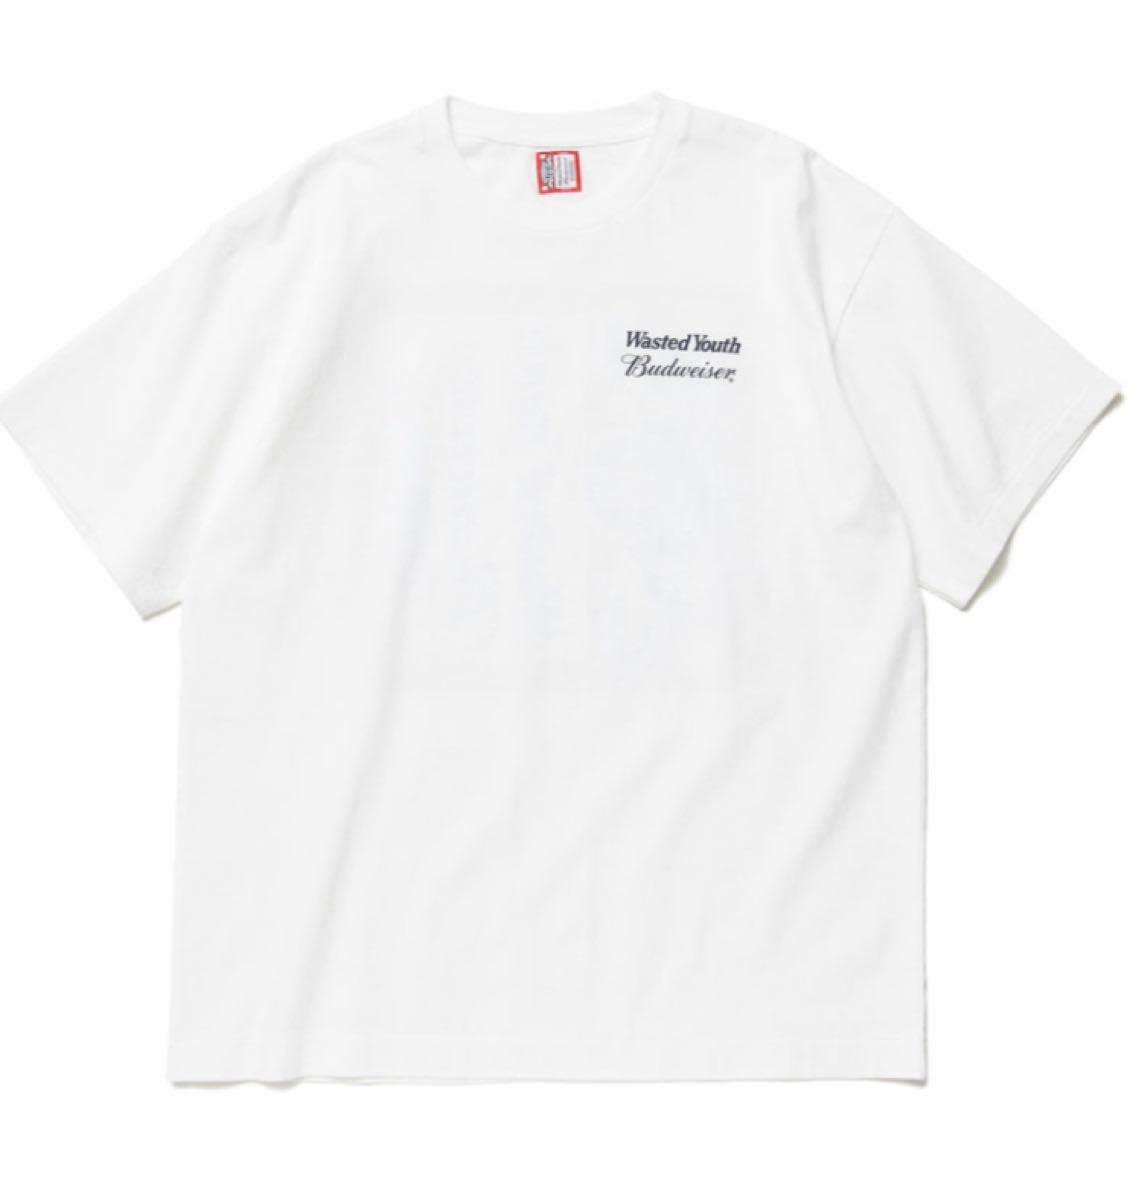 WYxBW T-SHIRT VERDY Wasted Youth Budweiser Humanmade Tee XL